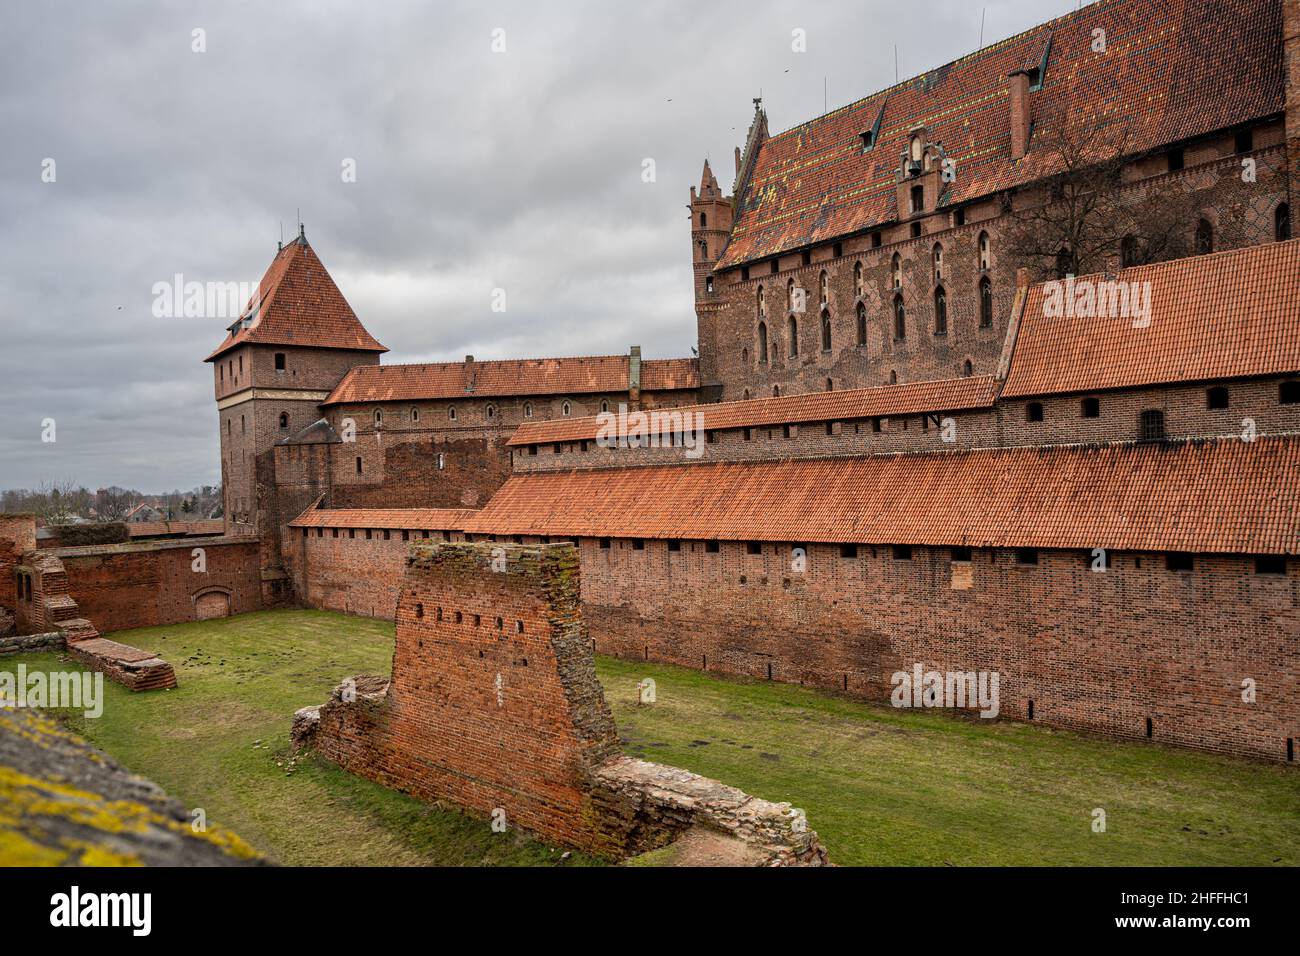 The medieval Castle of the Teutonic Order in Malbork in the Pomerania region, Poland. This is the largest castle in the world measured by land area and a UNESCO World Heritage Site Stock Photo